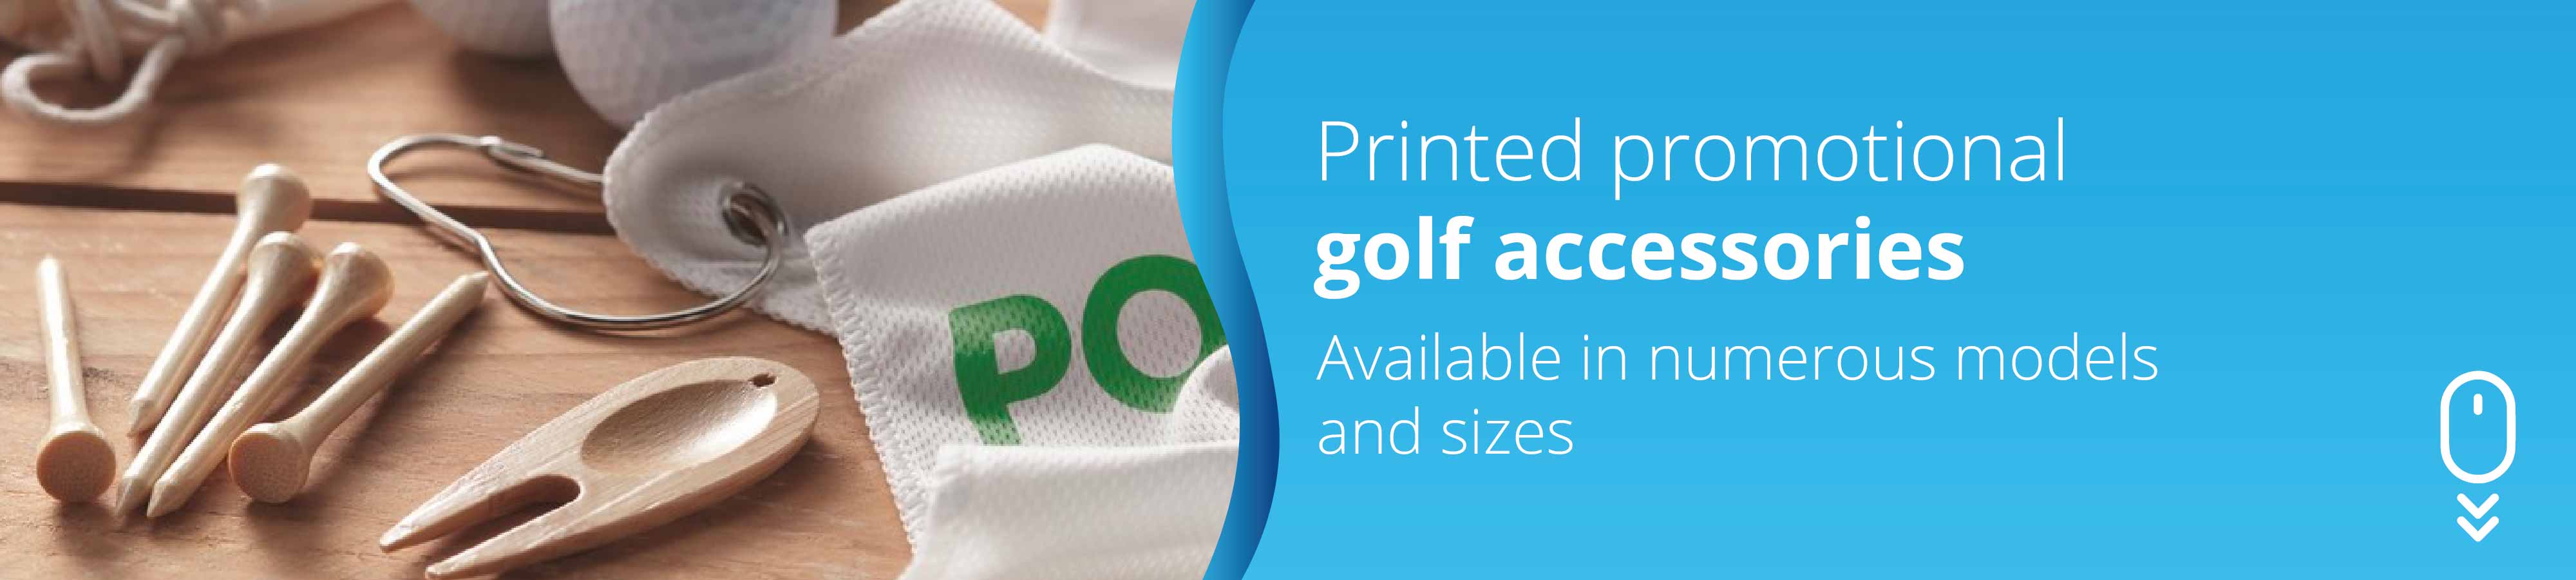 printed-promotional-golf-accessories